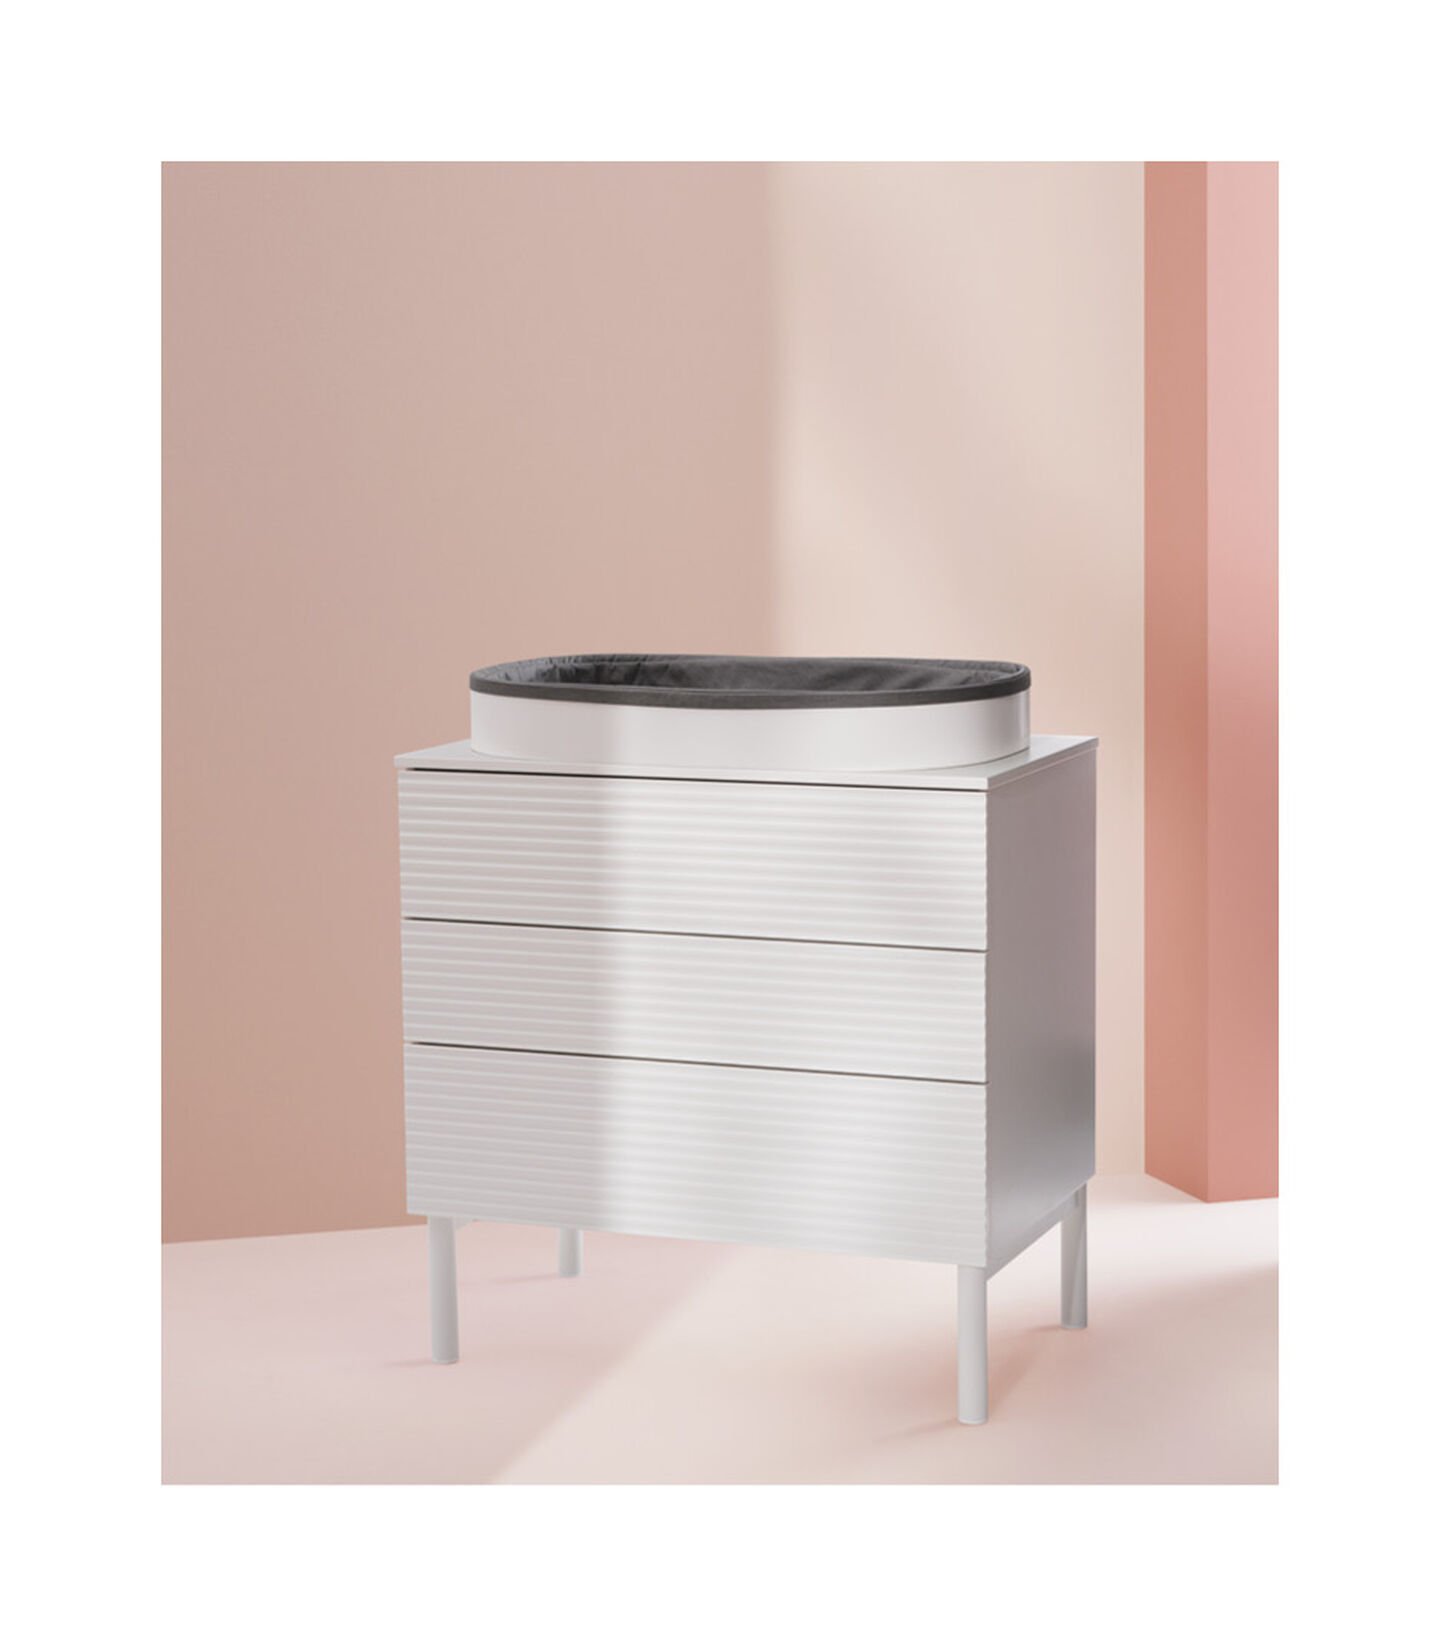 Stokke® Sleepi™ 2022, Dresser in White with Changer Top. view 2